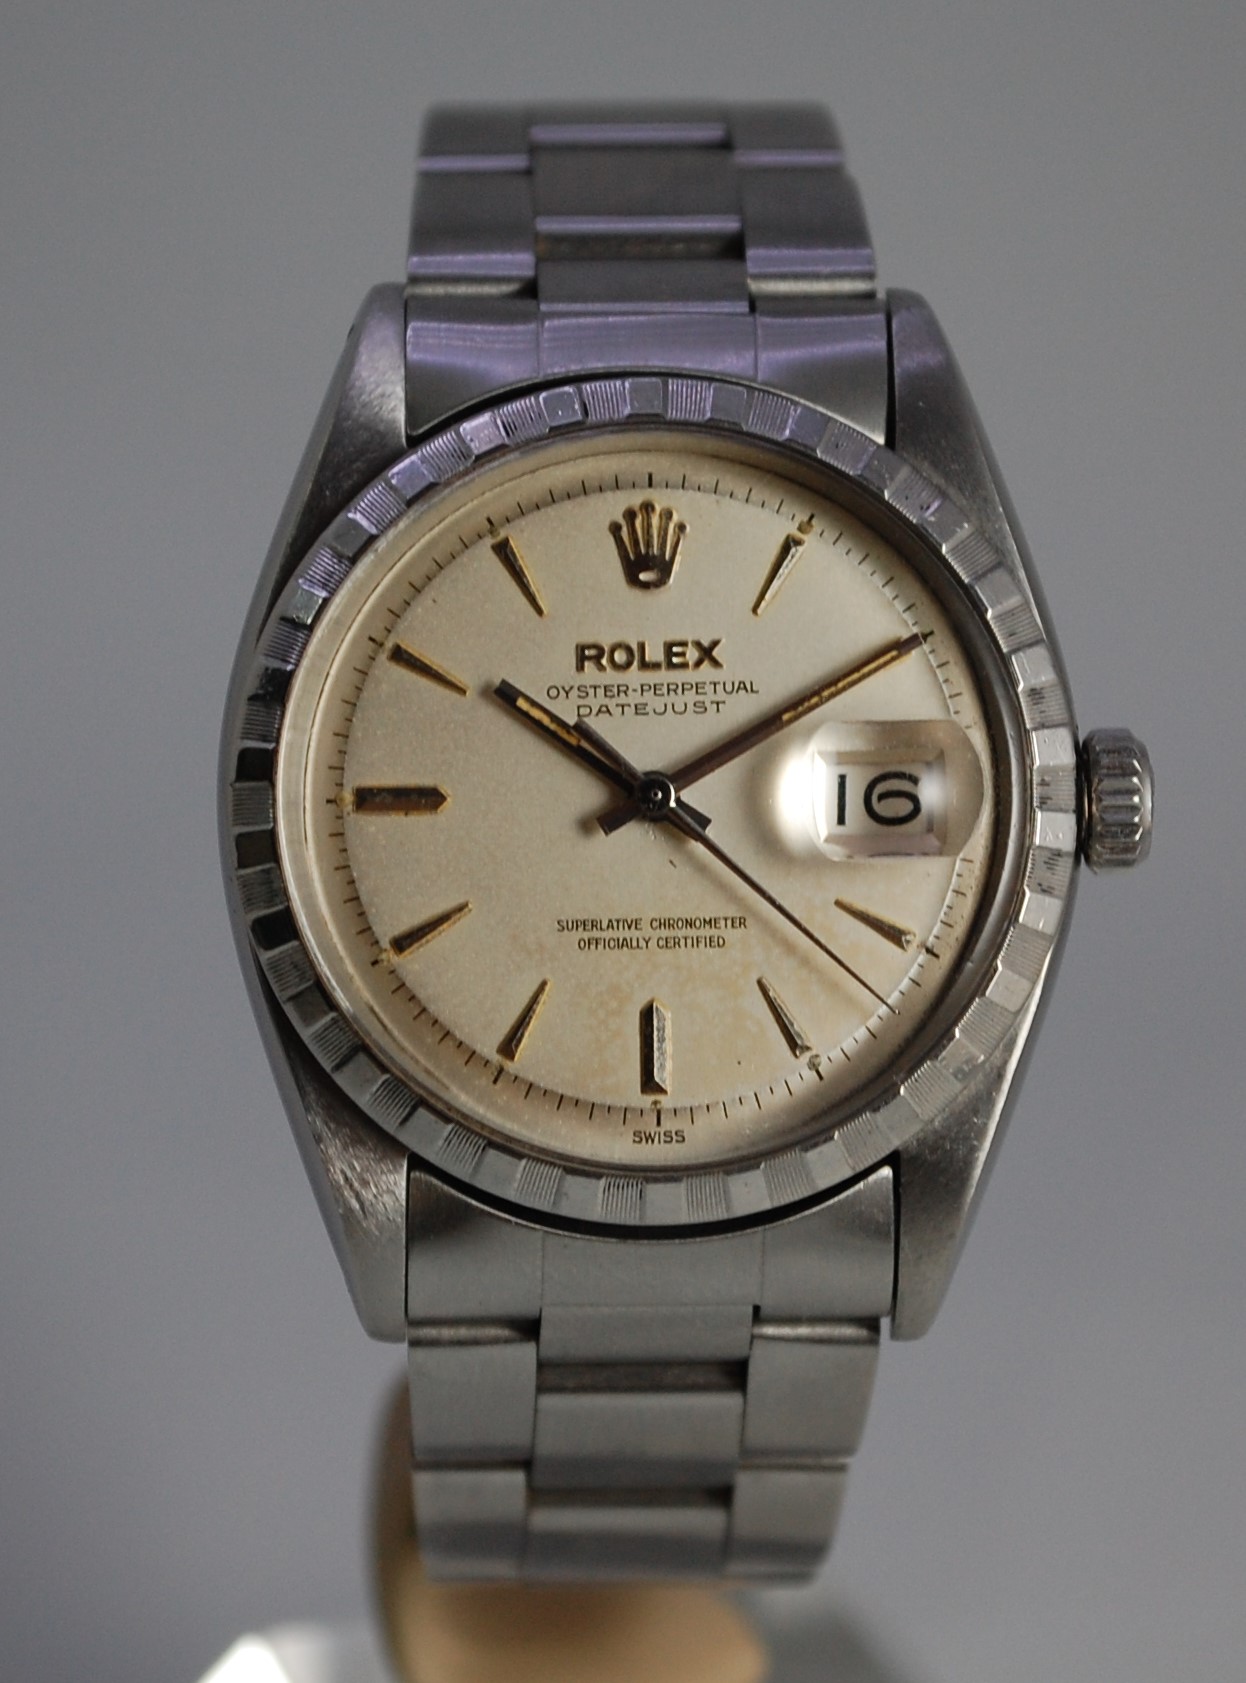 1959 Rolex Datejust reference 6605 